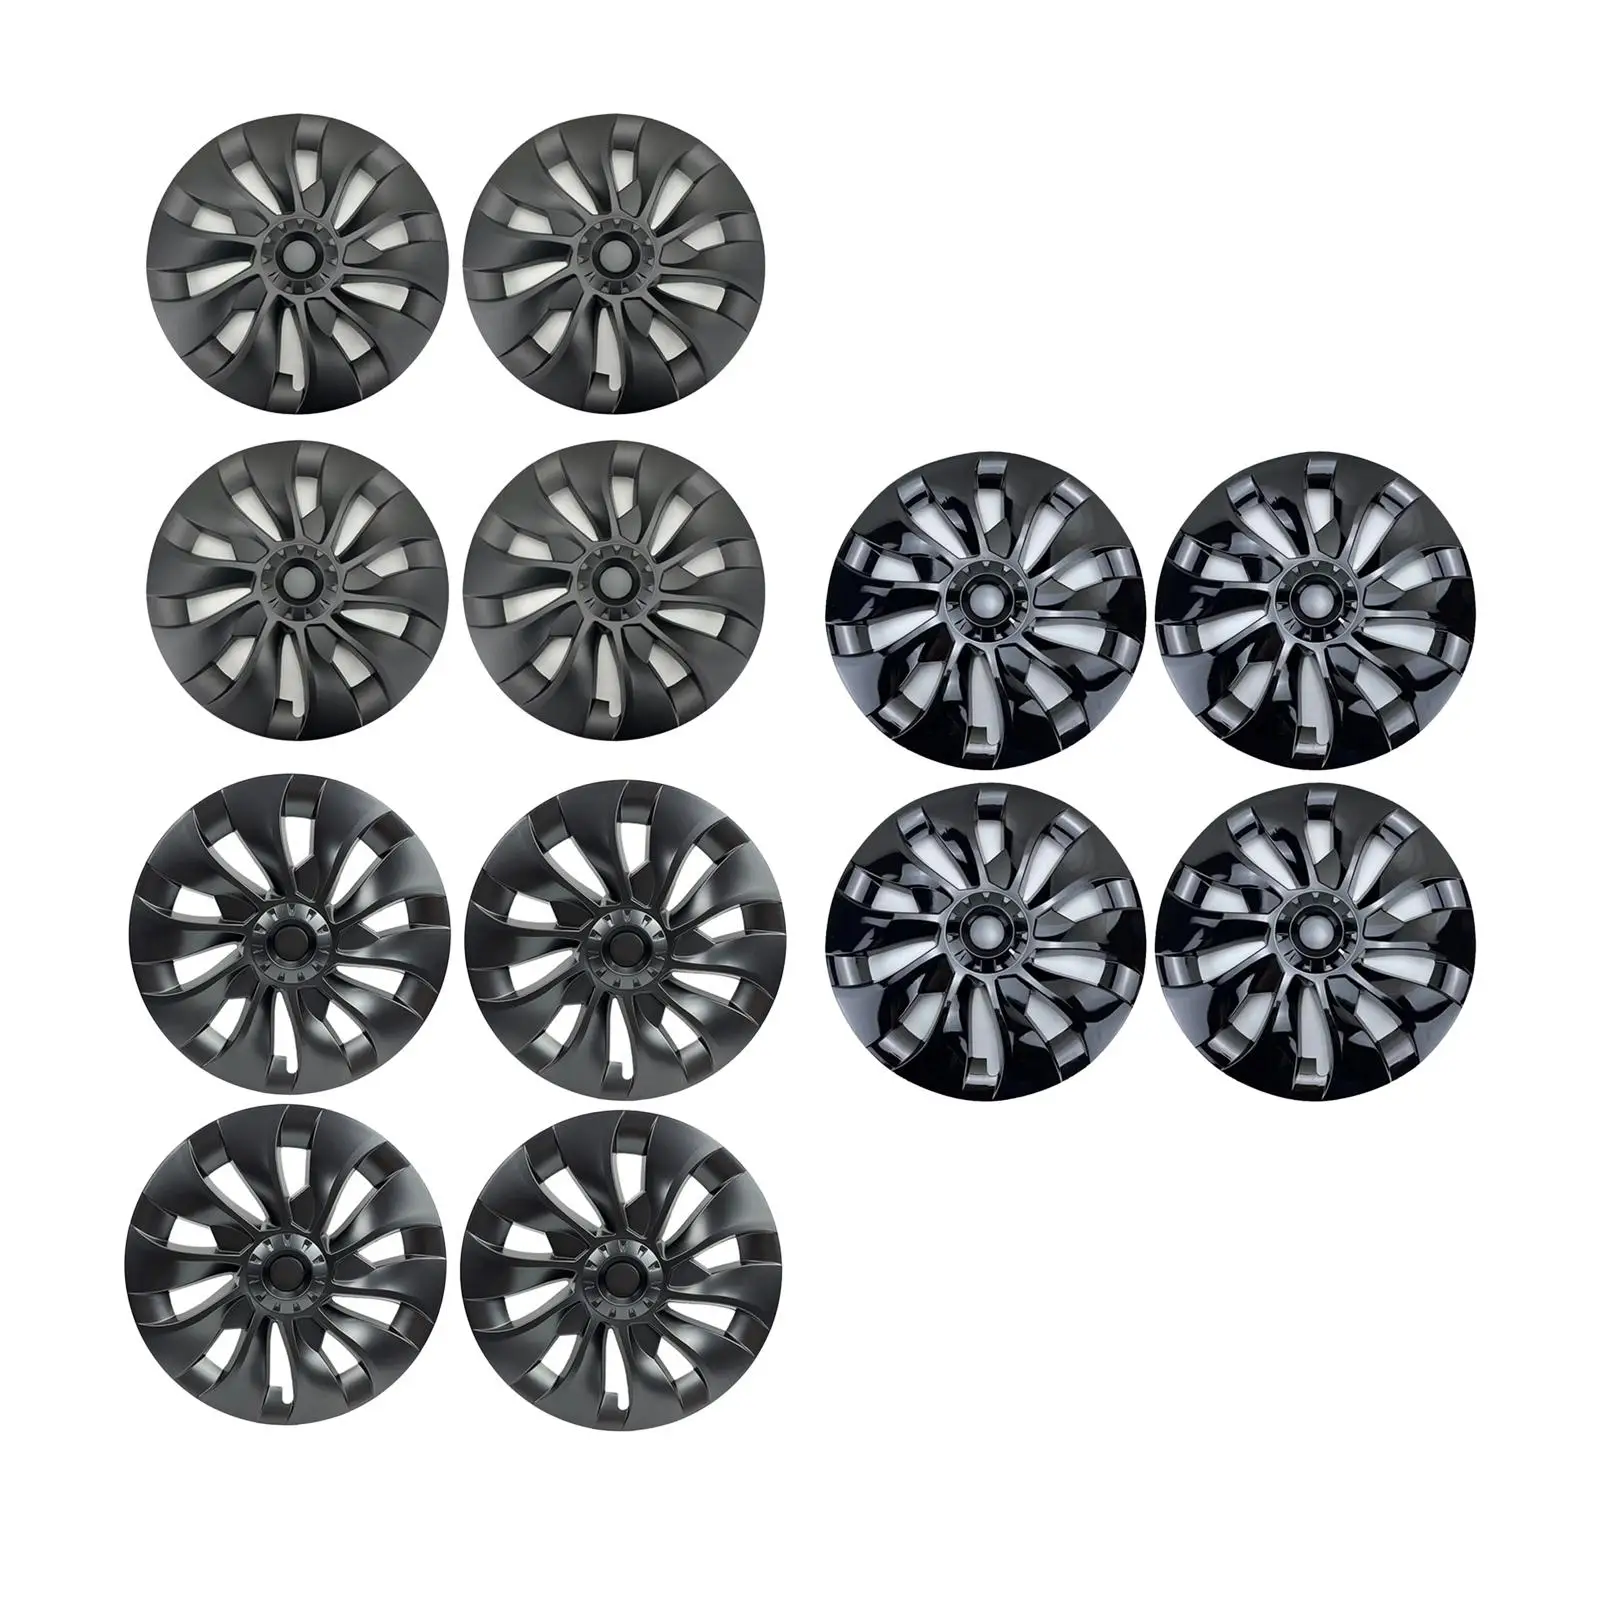 4x 18 inch Hub Cap Replace Parts Automobile Wheel Cover High Quality Hubcap Full Rim Cover for Tesla Model 3